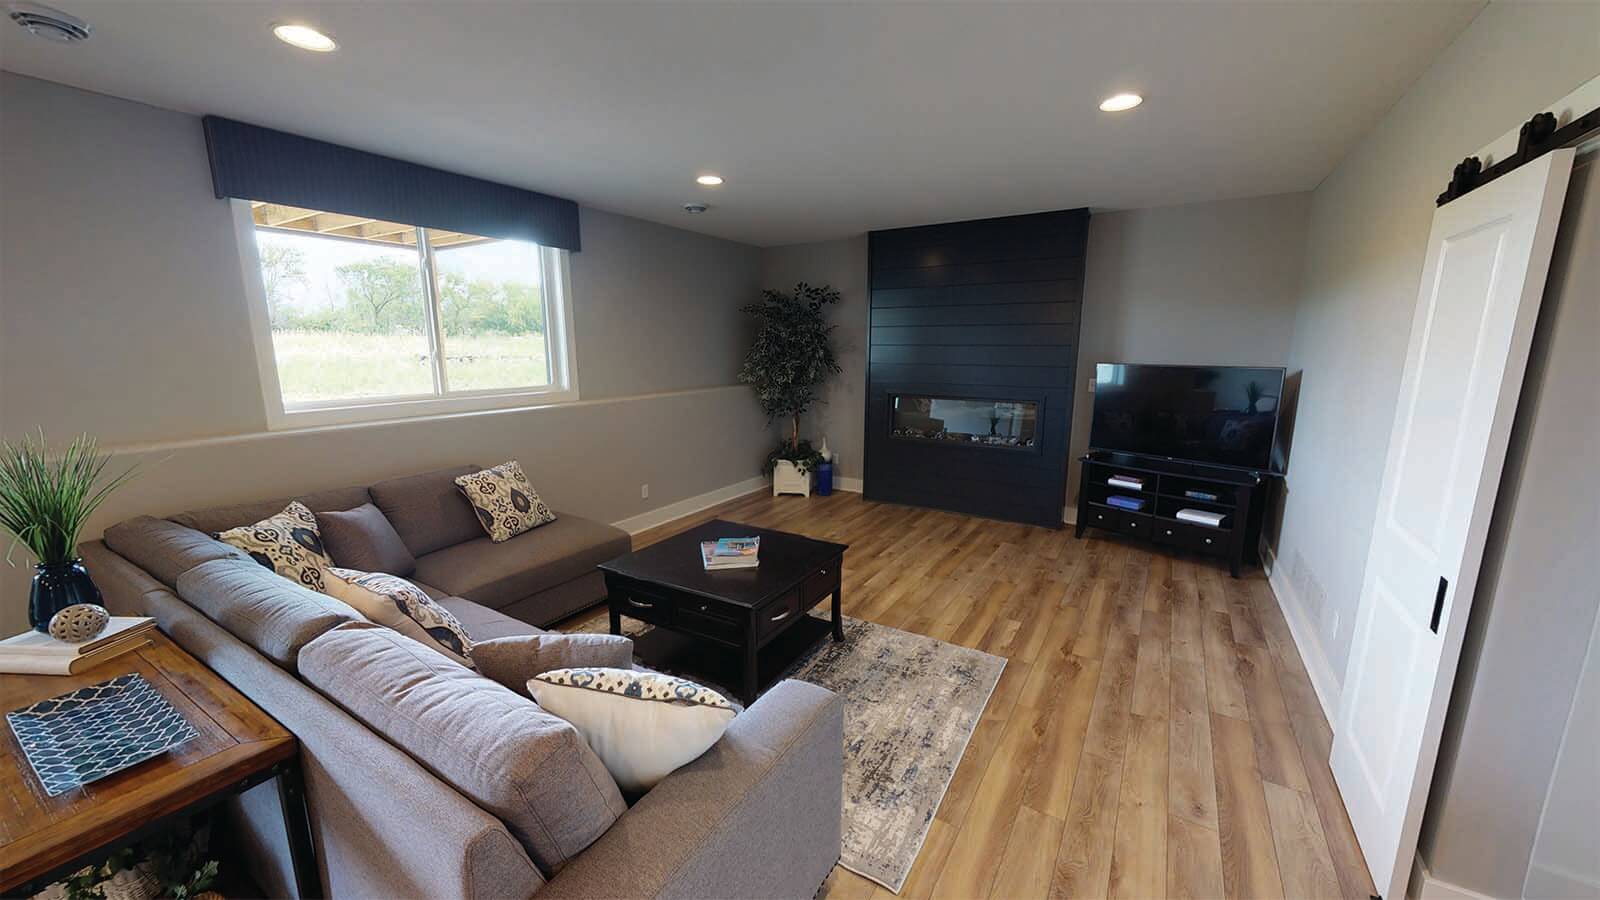 The Brooklyn II at Sanctuary at Good Hope Subdivision, Lower Level Family Room